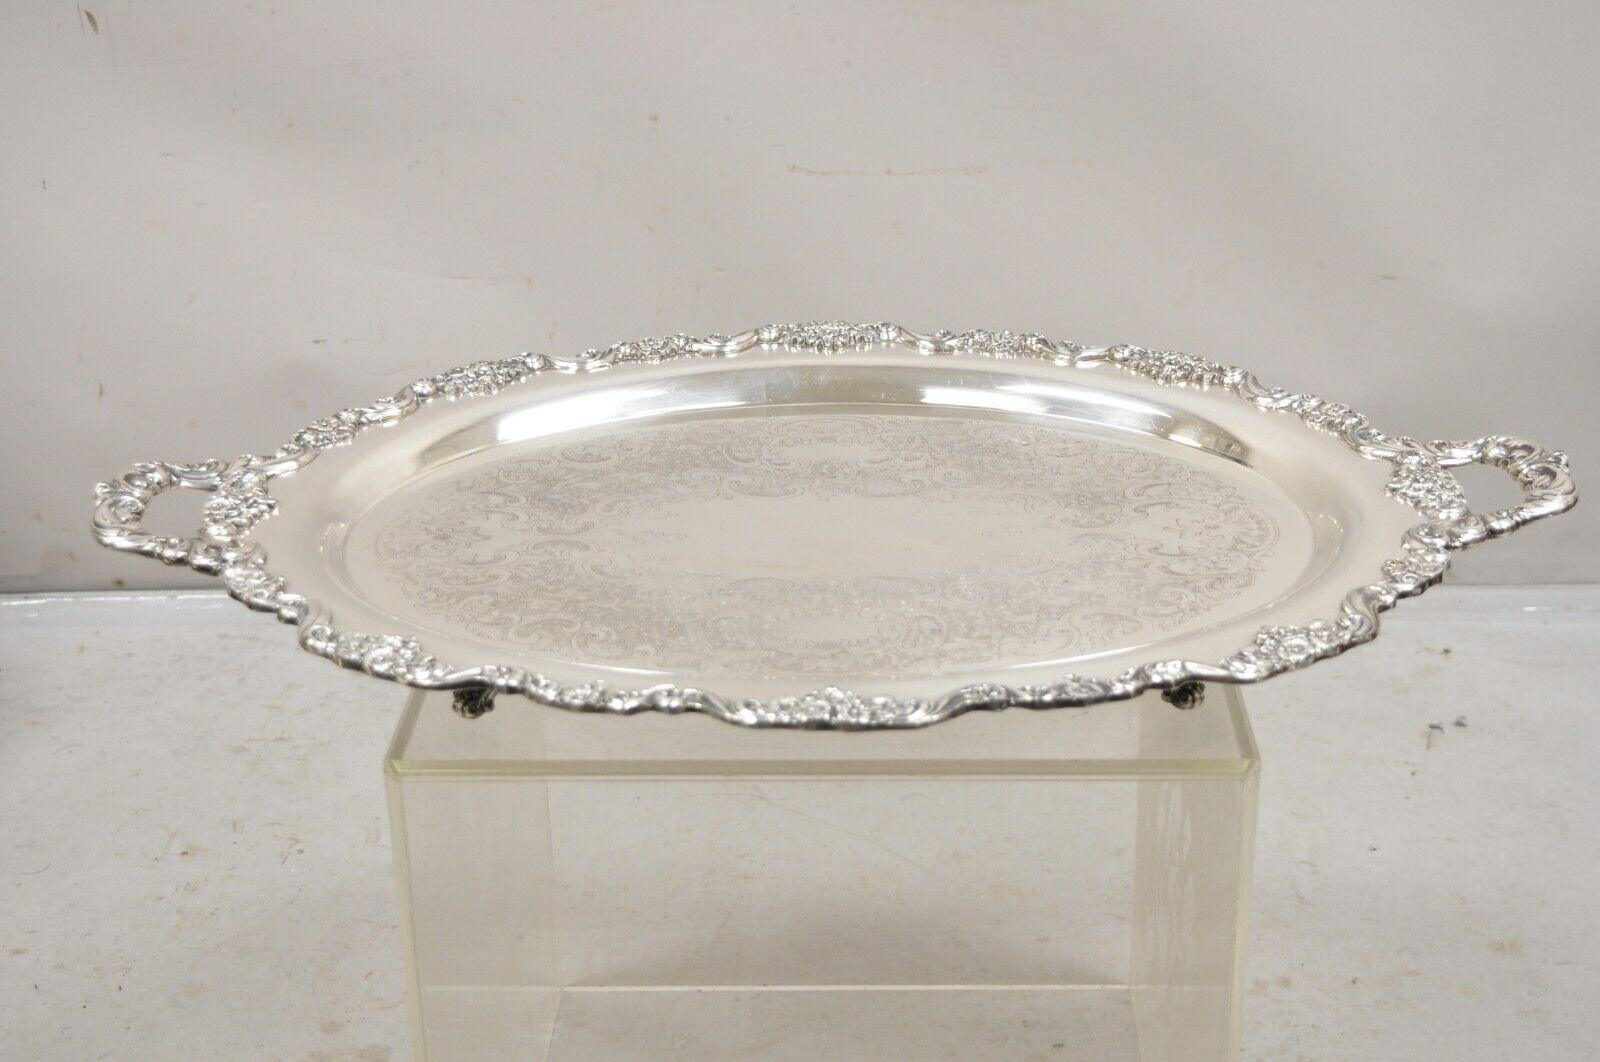 EPCA Poole Silver Co 400 Lancaster Rose Large Silver Plate Serving Platter Tray B. Circa Mid 20th Century. Measurements:  2